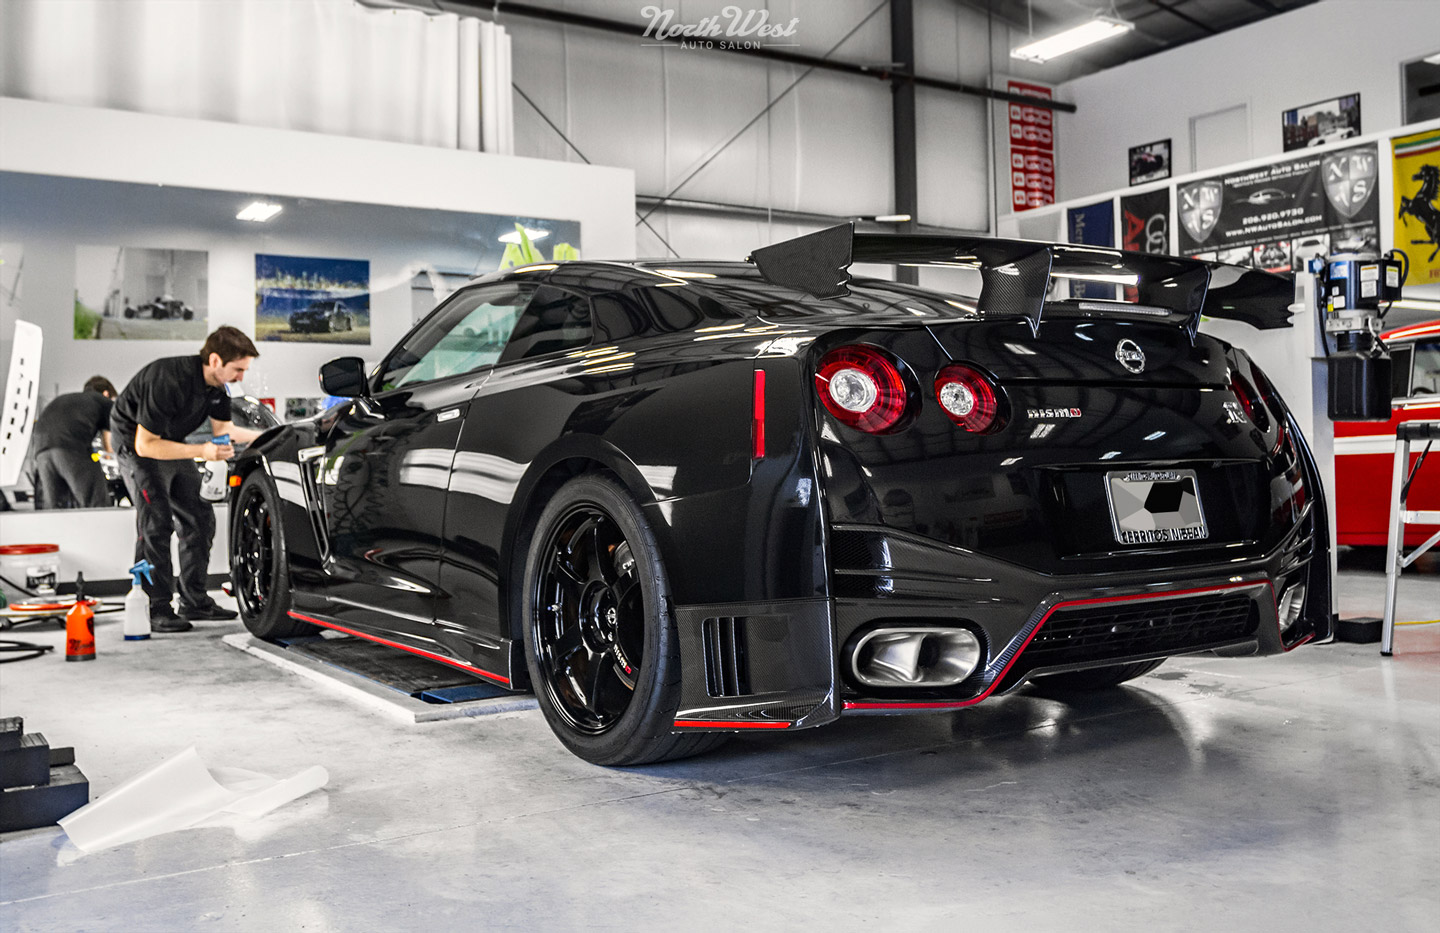 Nissan GT-R NISMO gets New Car Detail, Tint & XPEL PPF